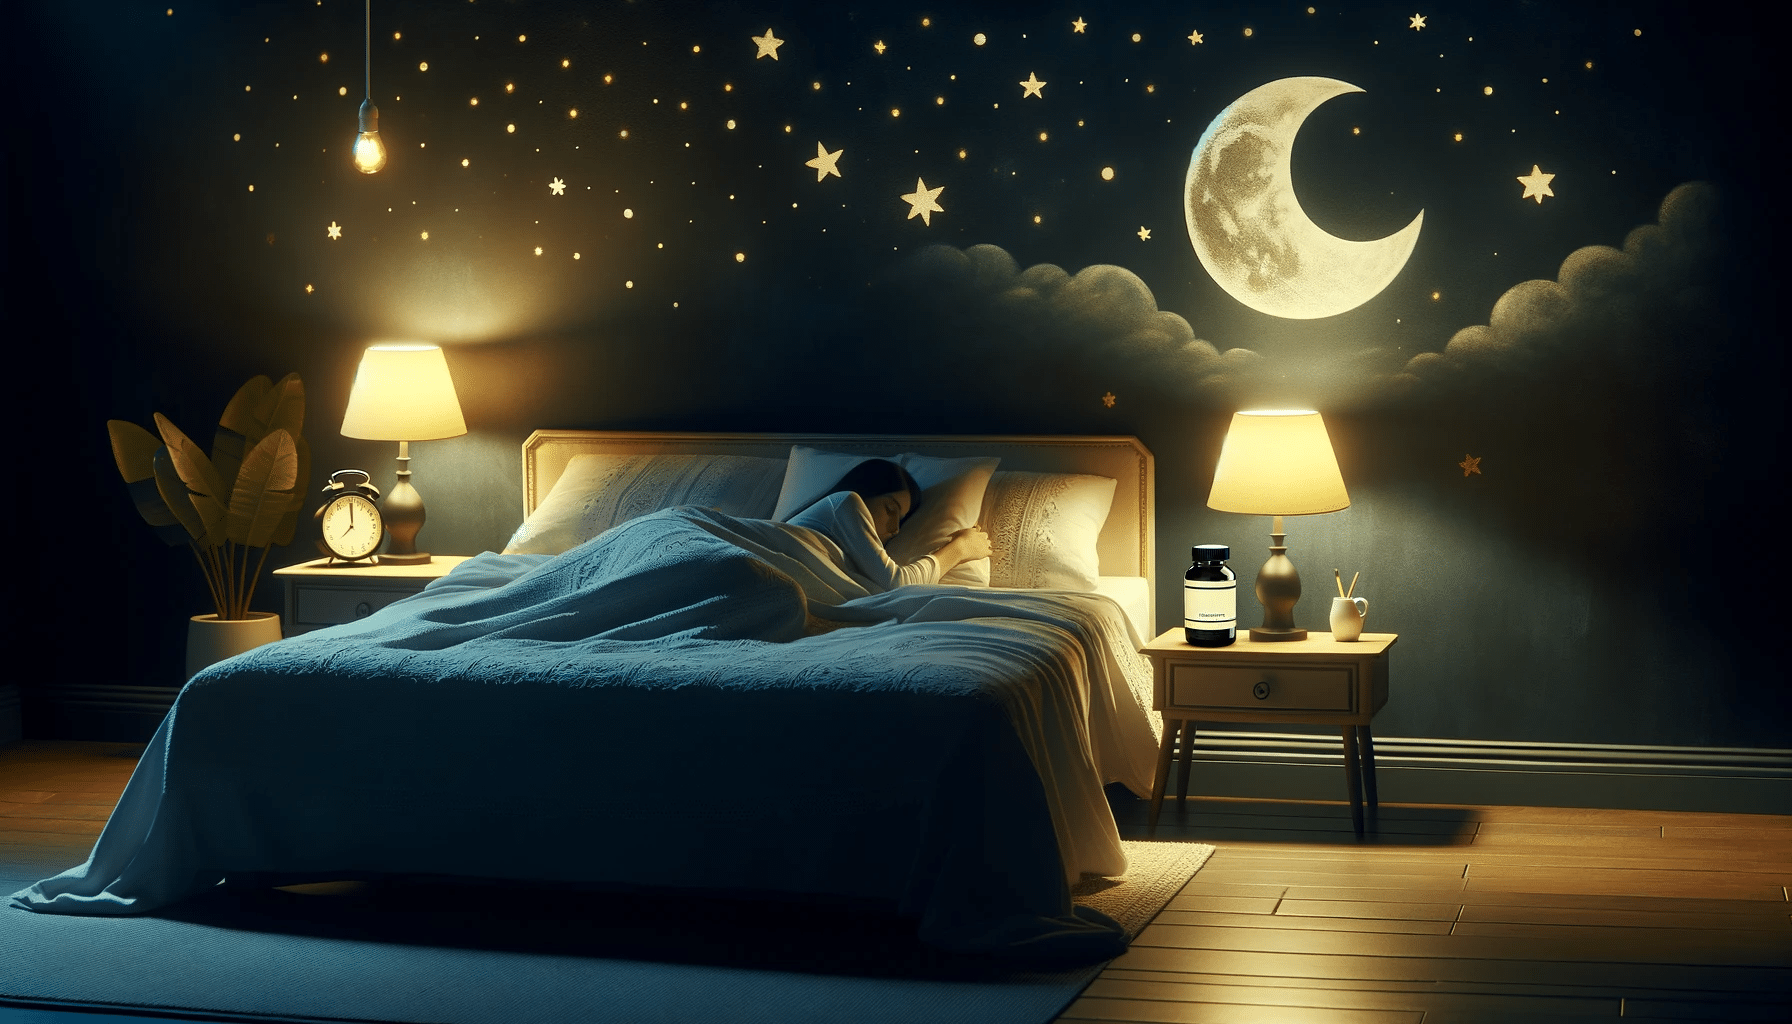 DALL·E 2024 01 07 19.44.35 Horizontal image of a cozy bedroom at night symbolizing sleep. Theres a person lying in bed visible under the soft glow of a bedside lamp. The room